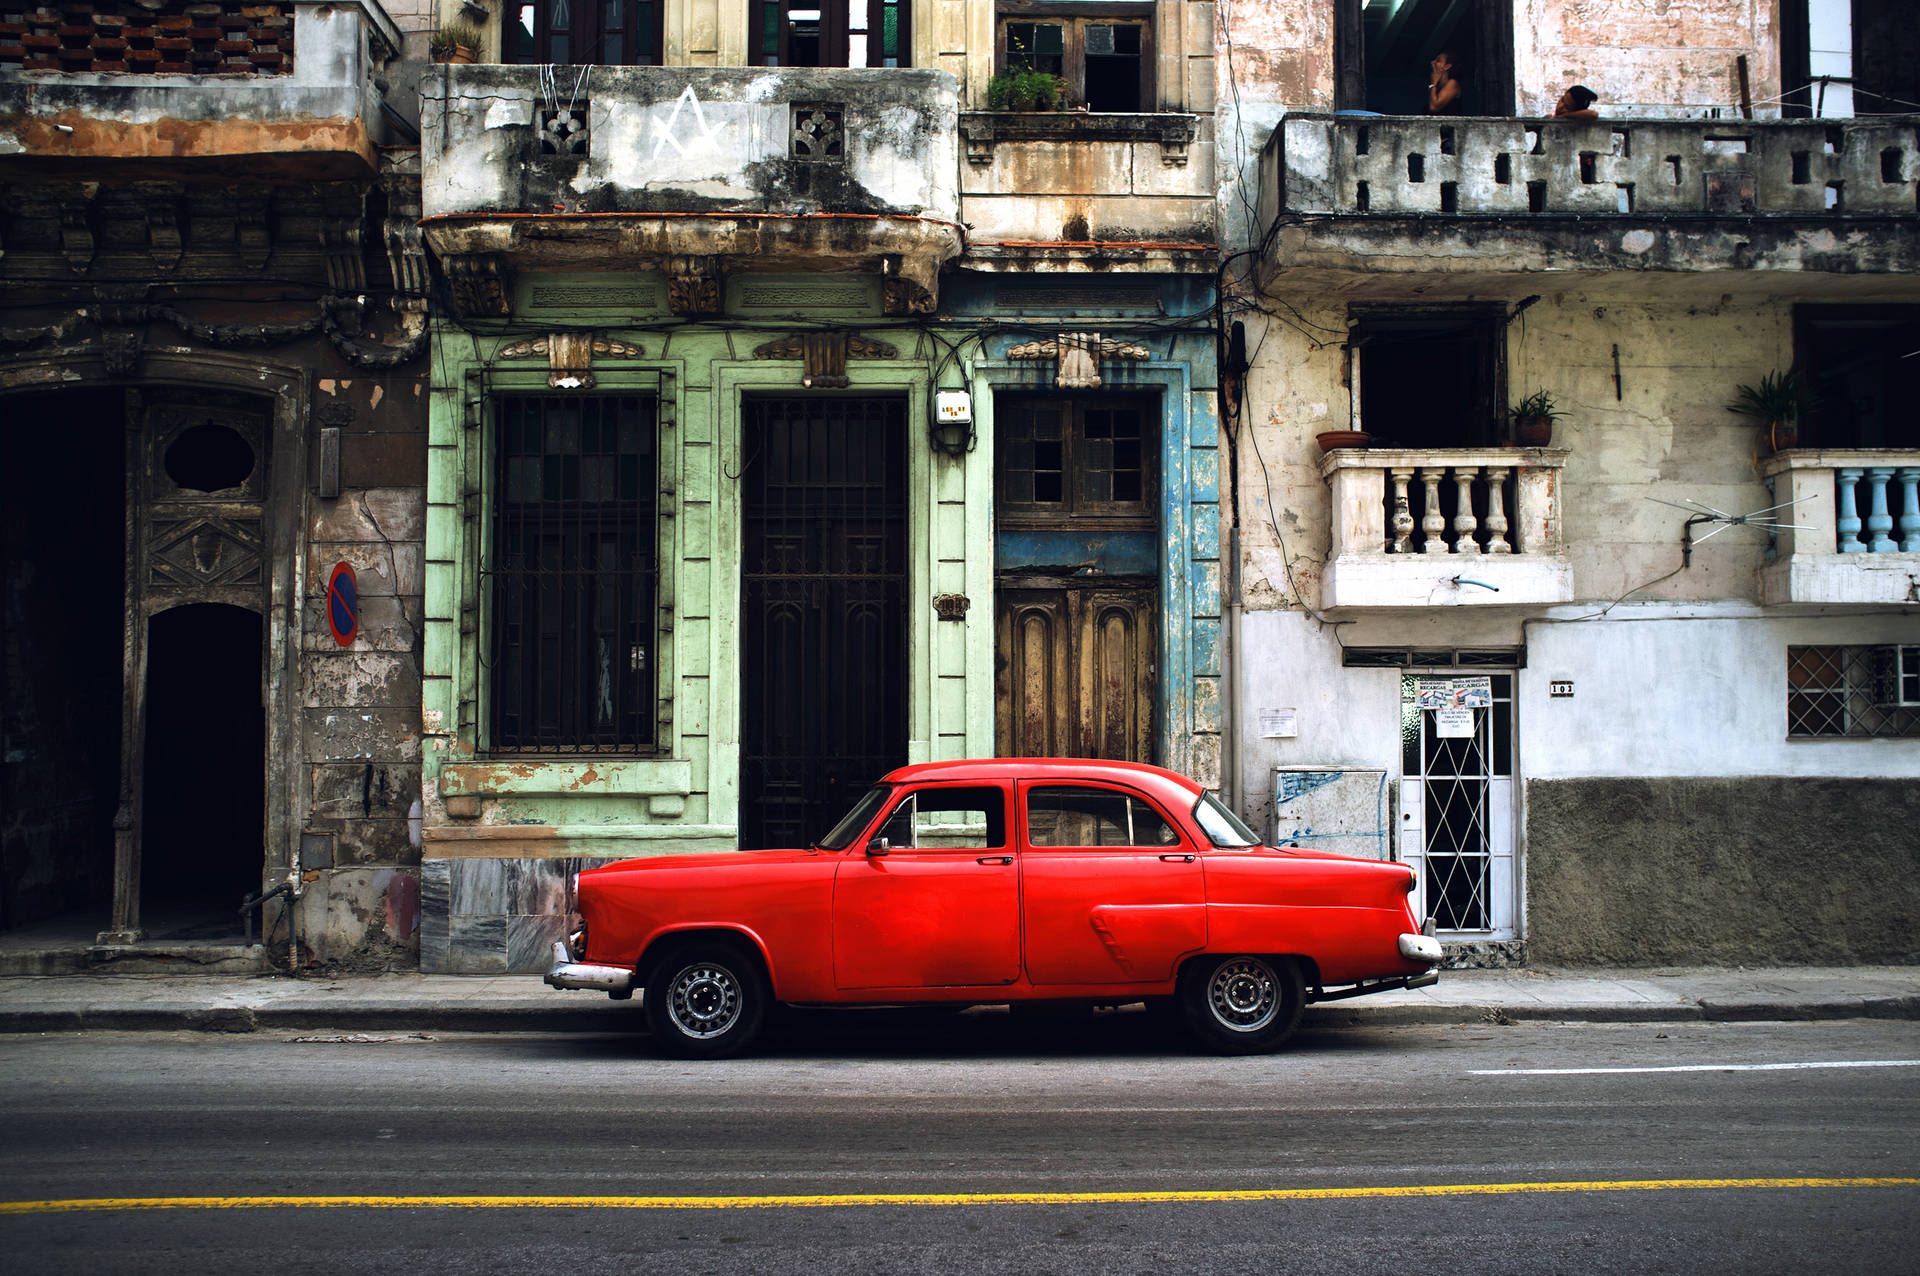 Car Parked On The Road In Cuba Wallpaper